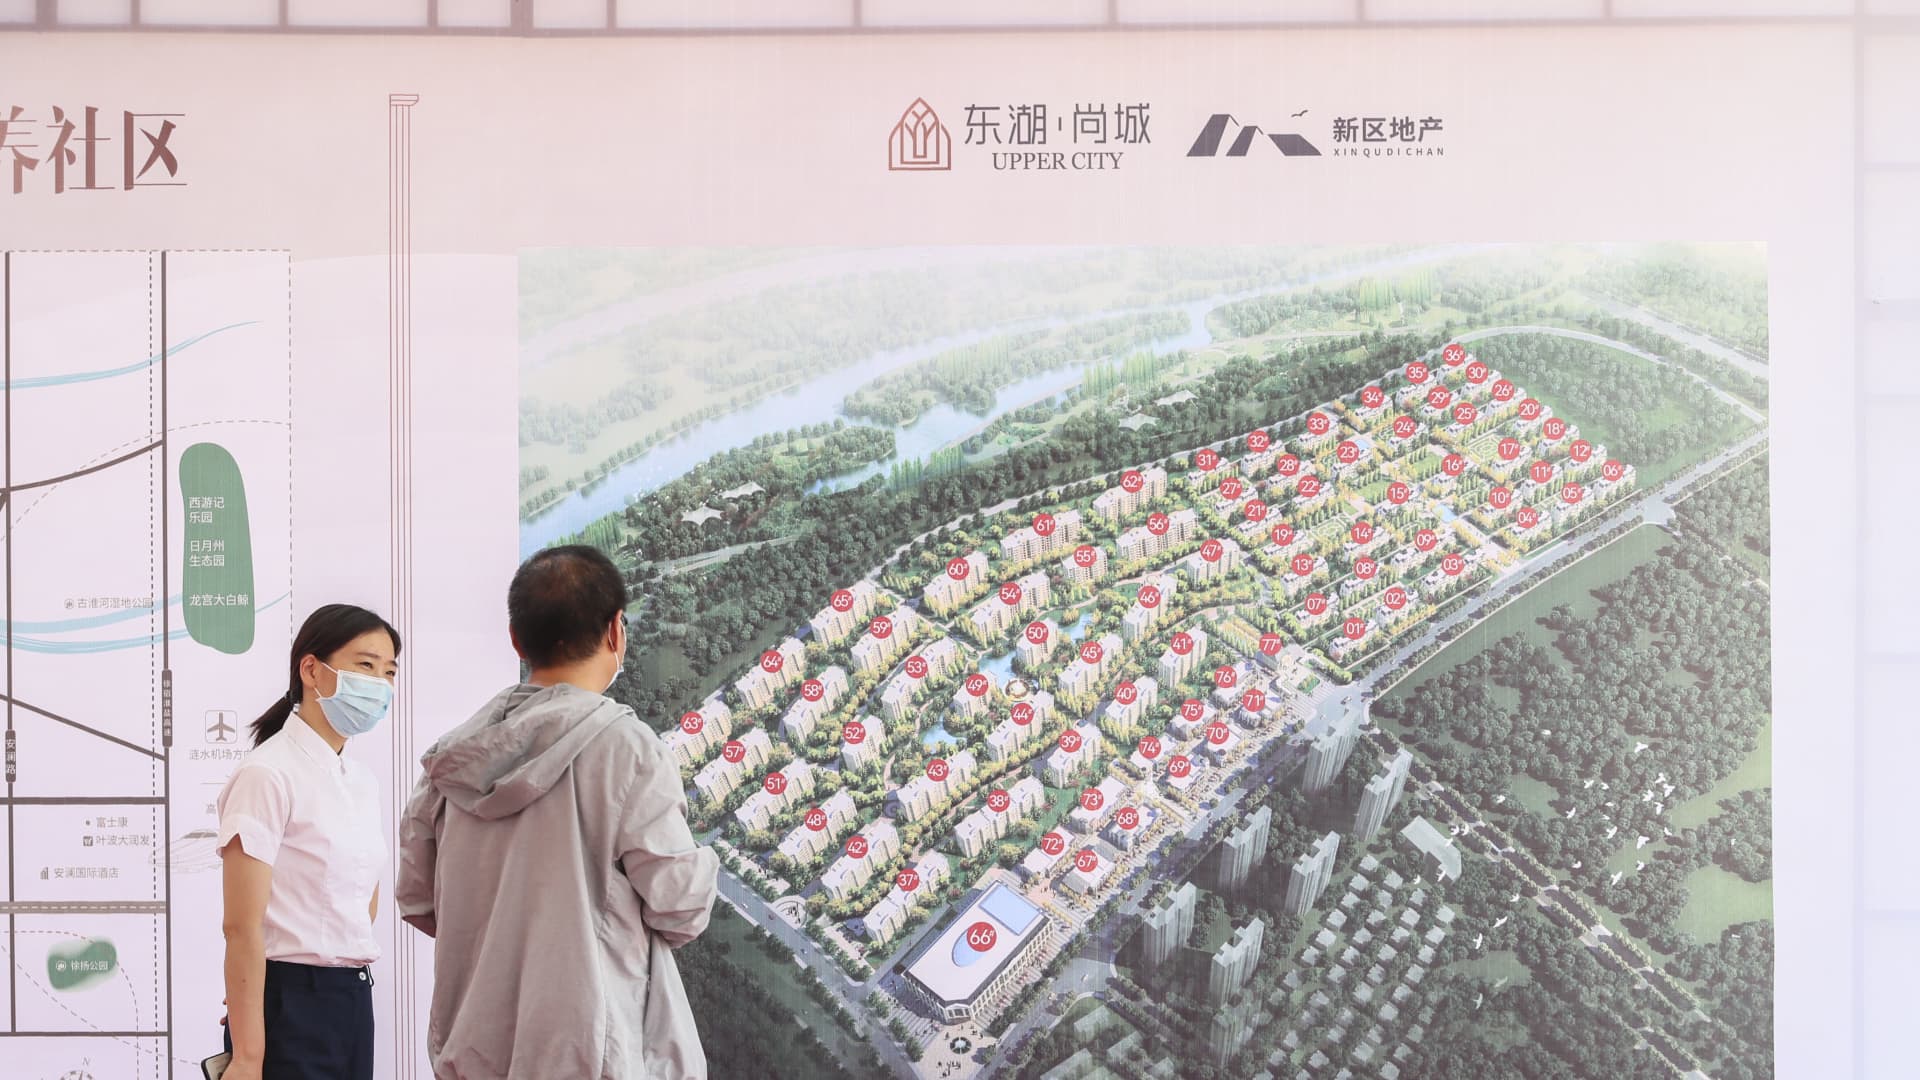 China’s property sales are set to plunge 30% — worse than in 2008, S&P says